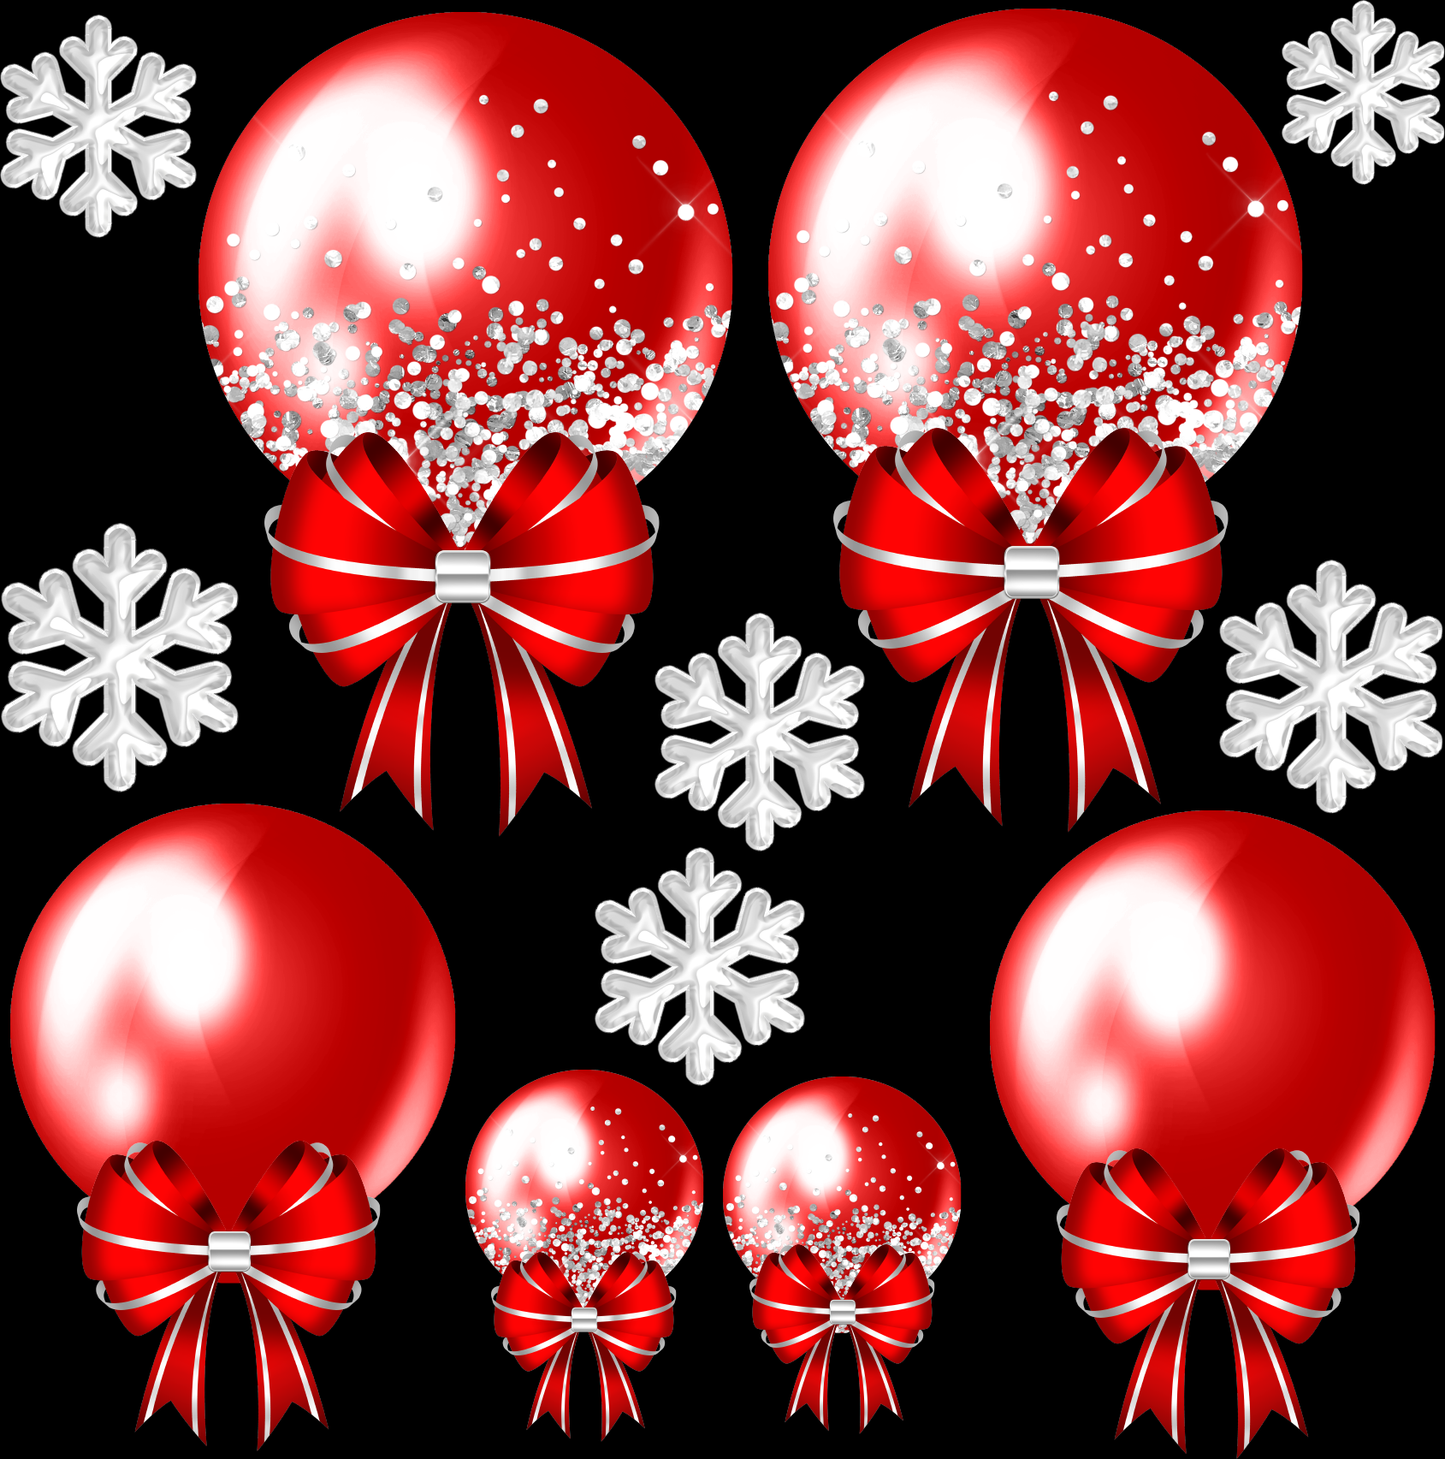 Christmas Balloons Red Set 2b Half Sheet  (Must Purchase 2 Half sheets - You Can Mix & Match)